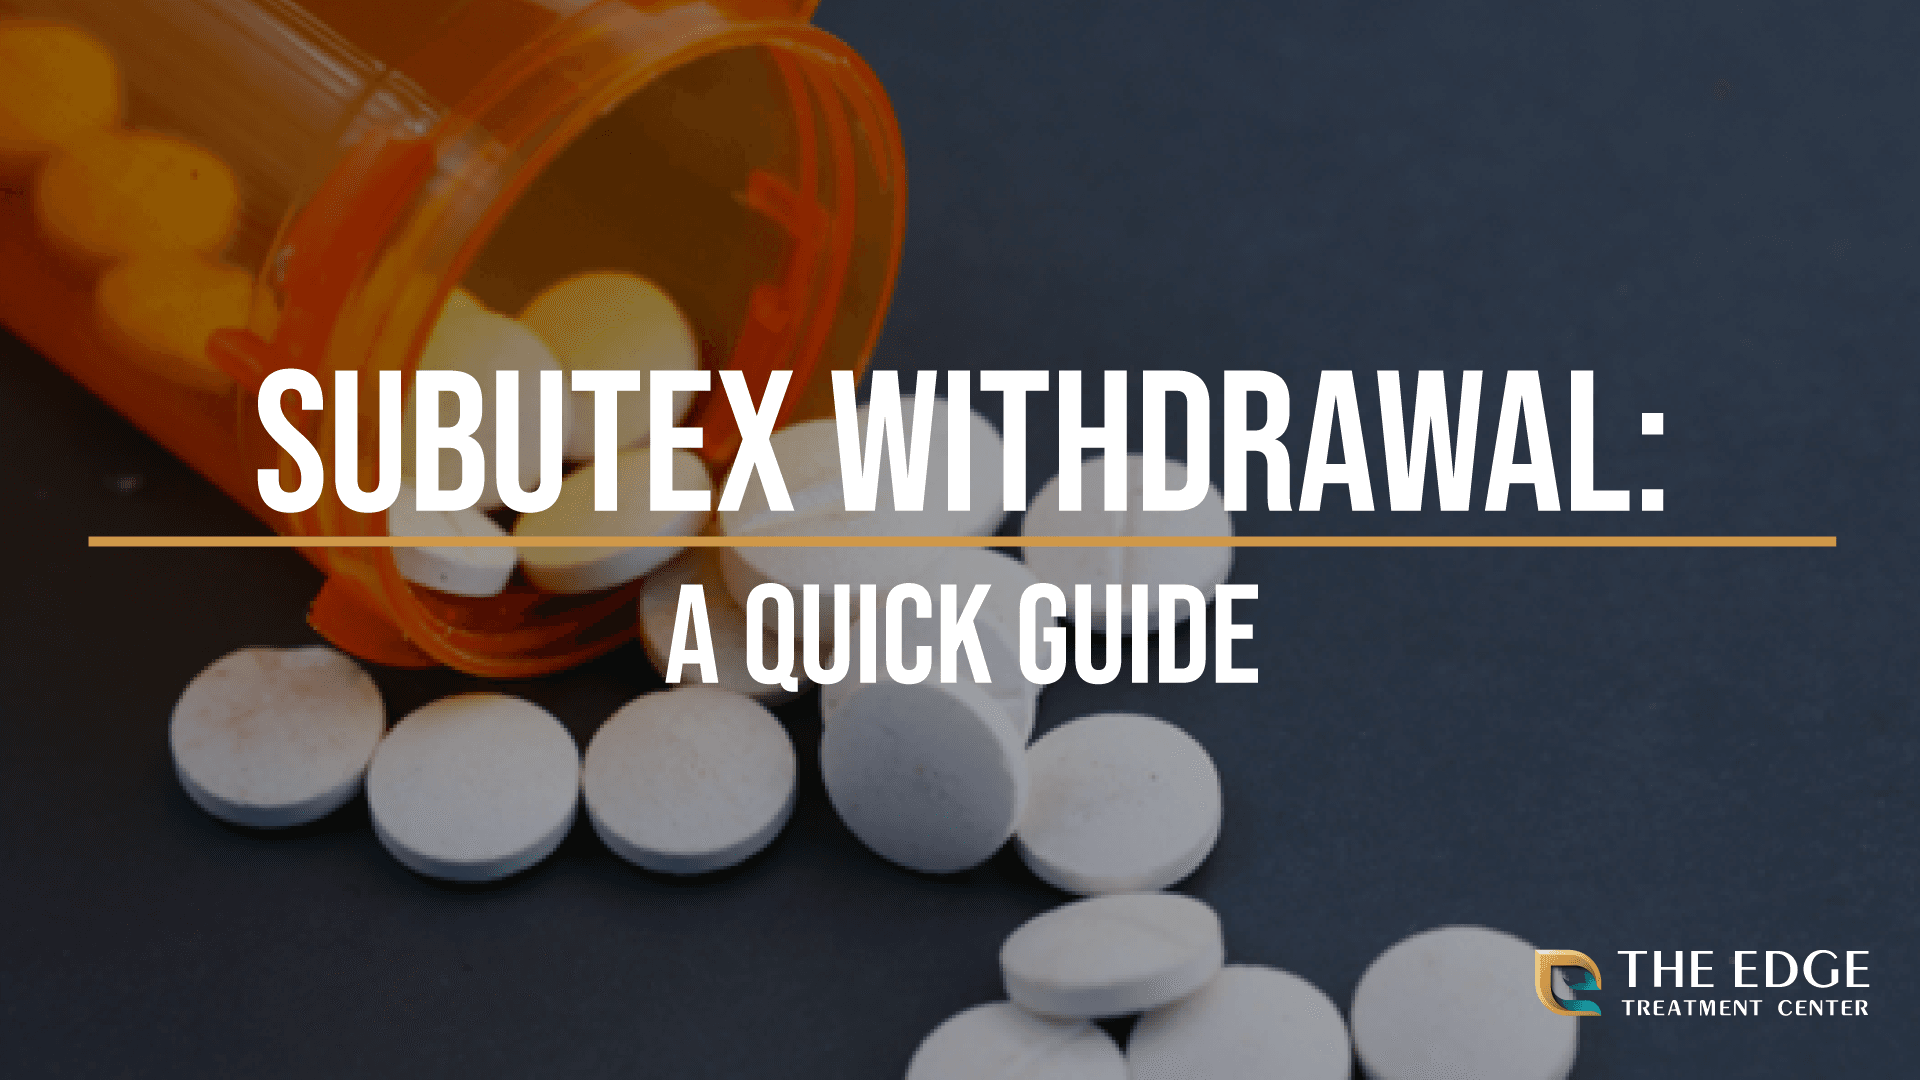 Subutex Withdrawal: What You Need to Know About Withdrawal from Subutex